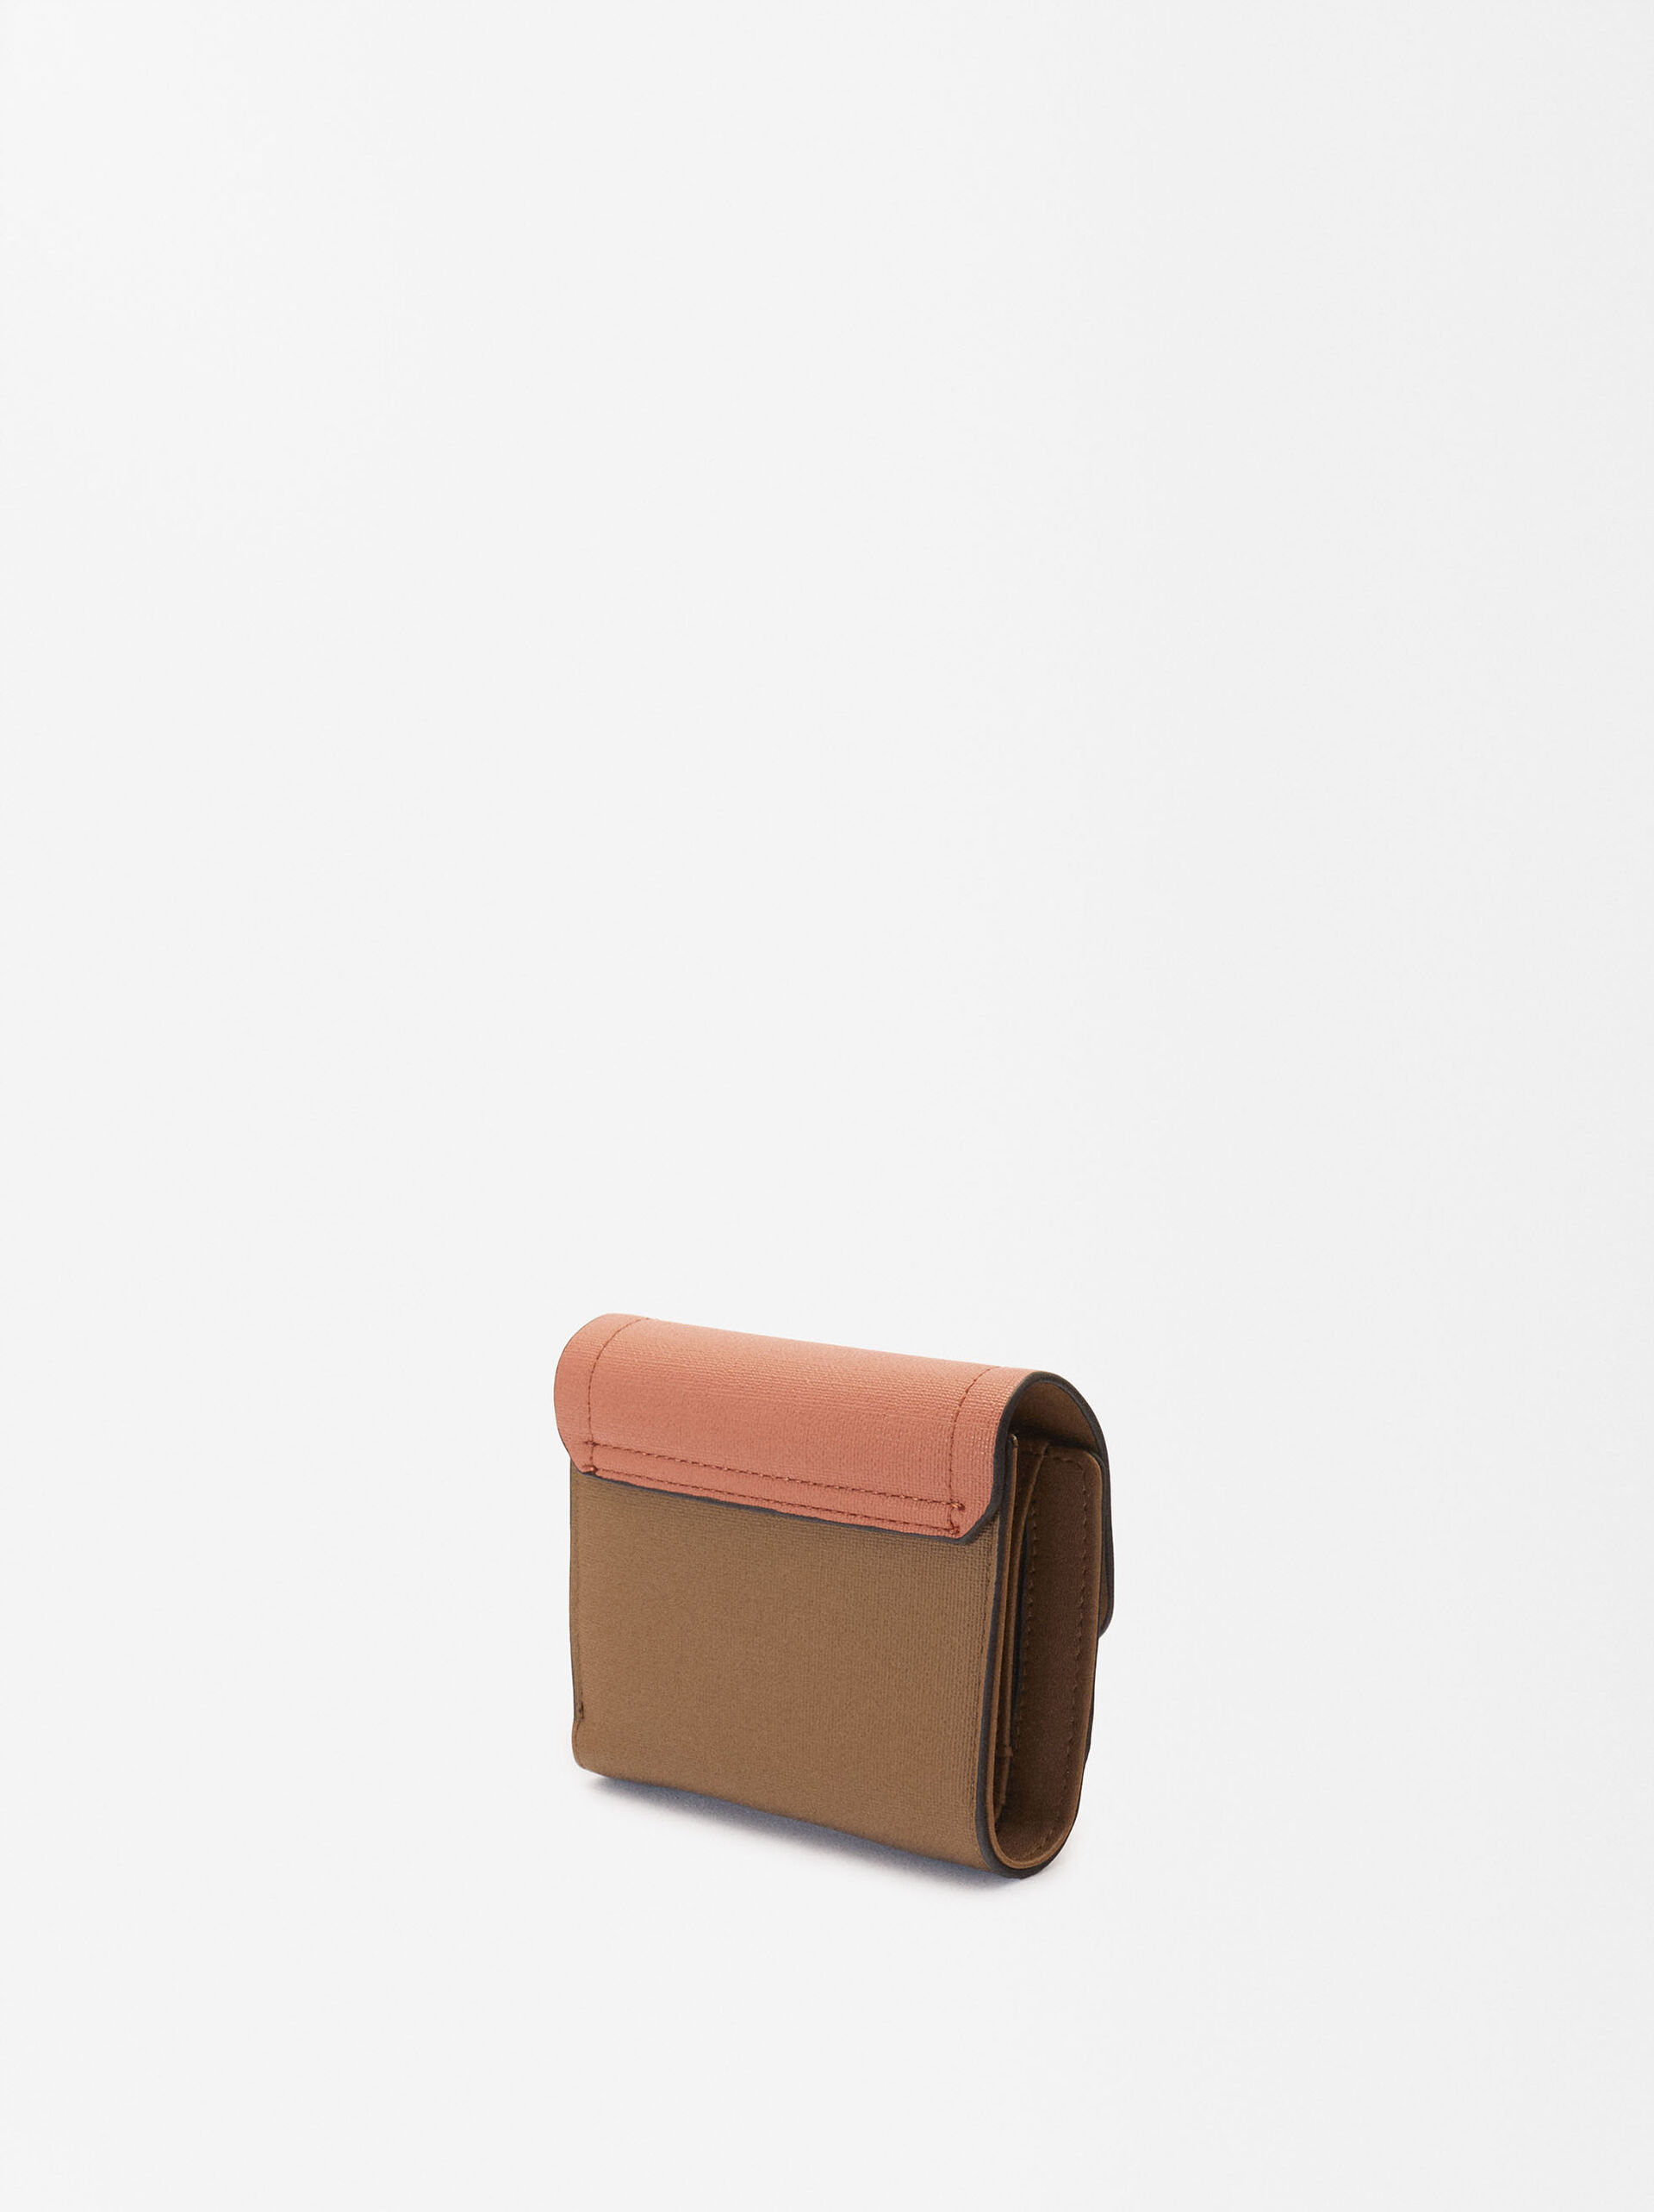 Wallet With Flap Closure image number 2.0